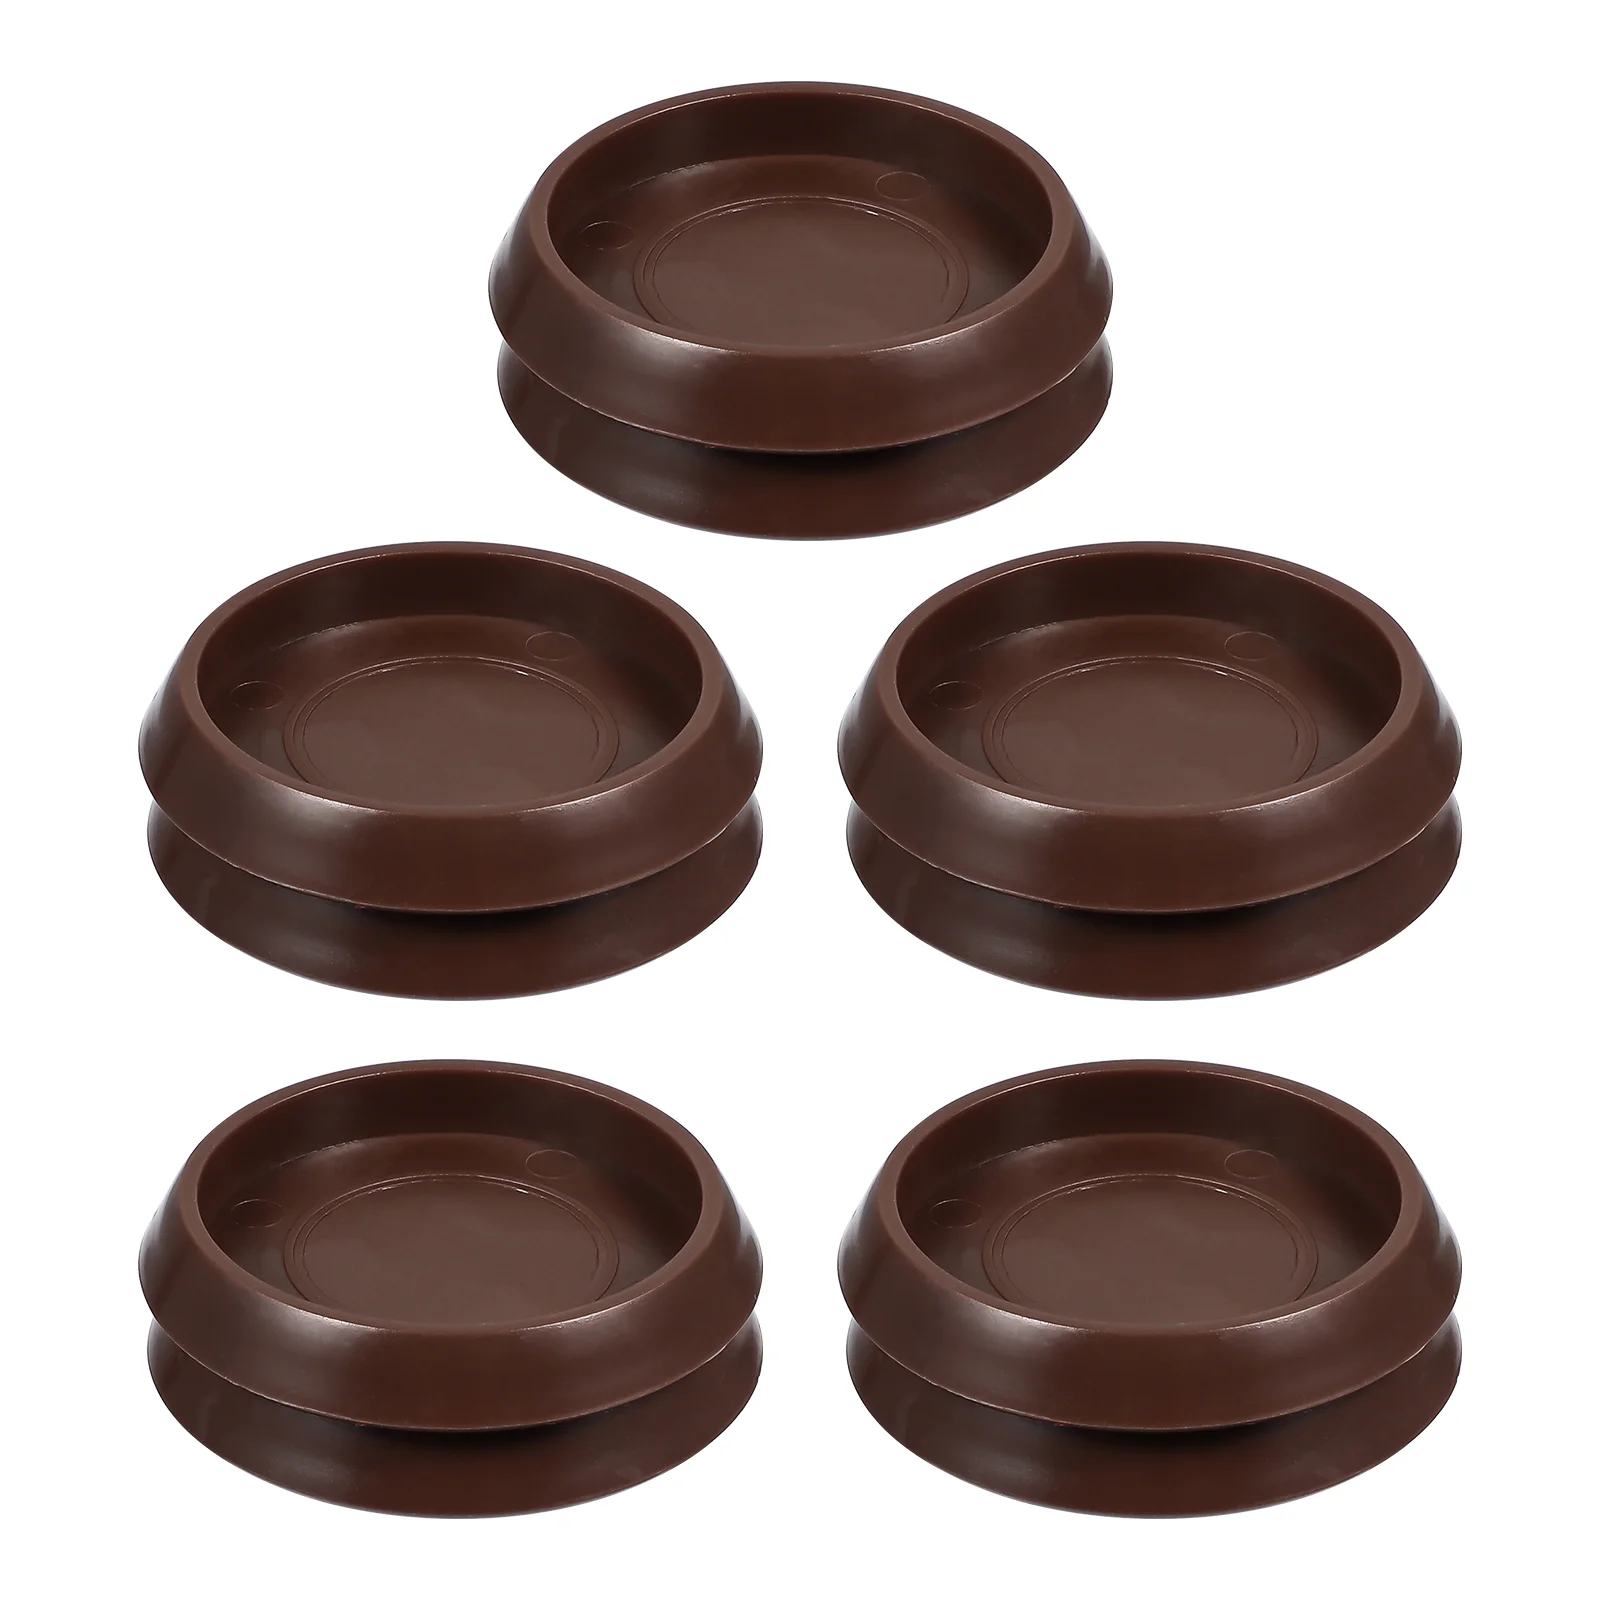 

10 Pcs Caster Cup Furniture Cups Coasters Carpet Piano Round Plug Floor Protectors Chairs Anti Slide Pads Area Rug